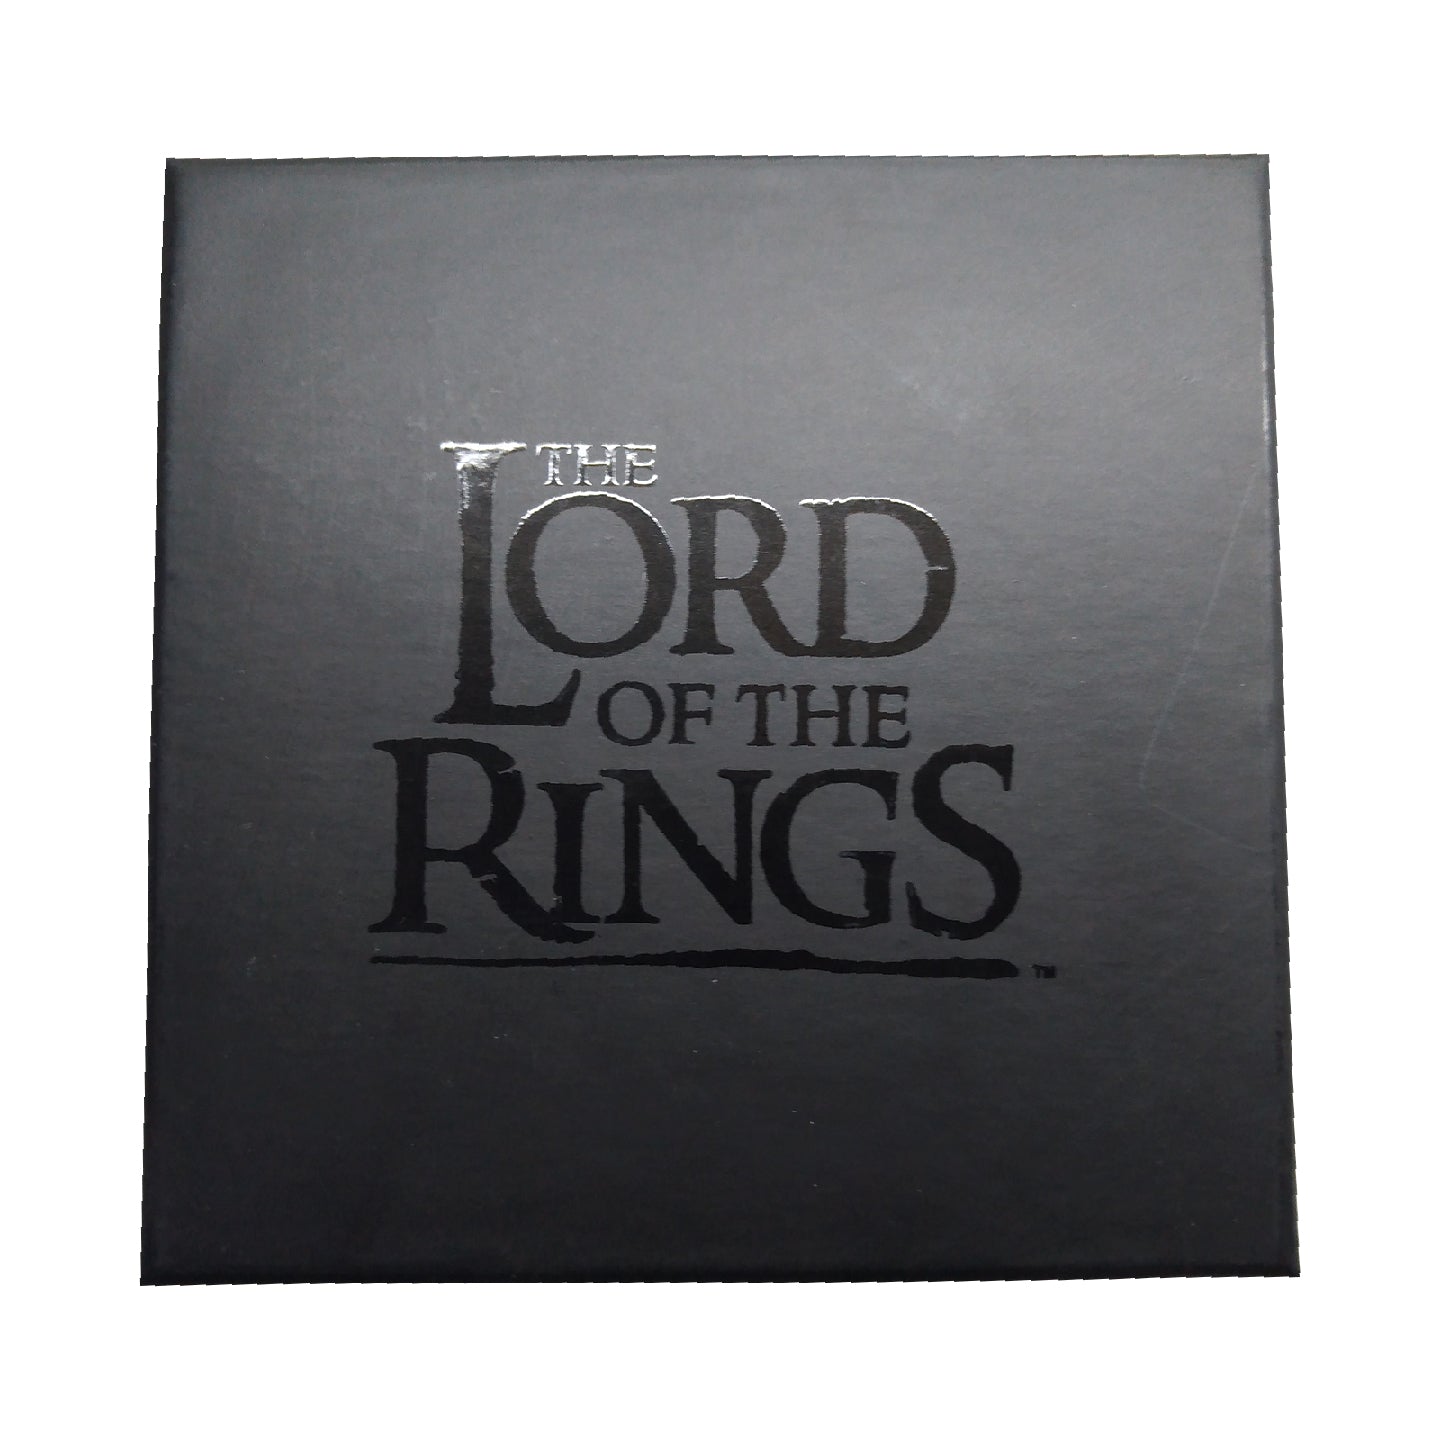 The Lord of the Rings Crown of Elessar Replica Necklace